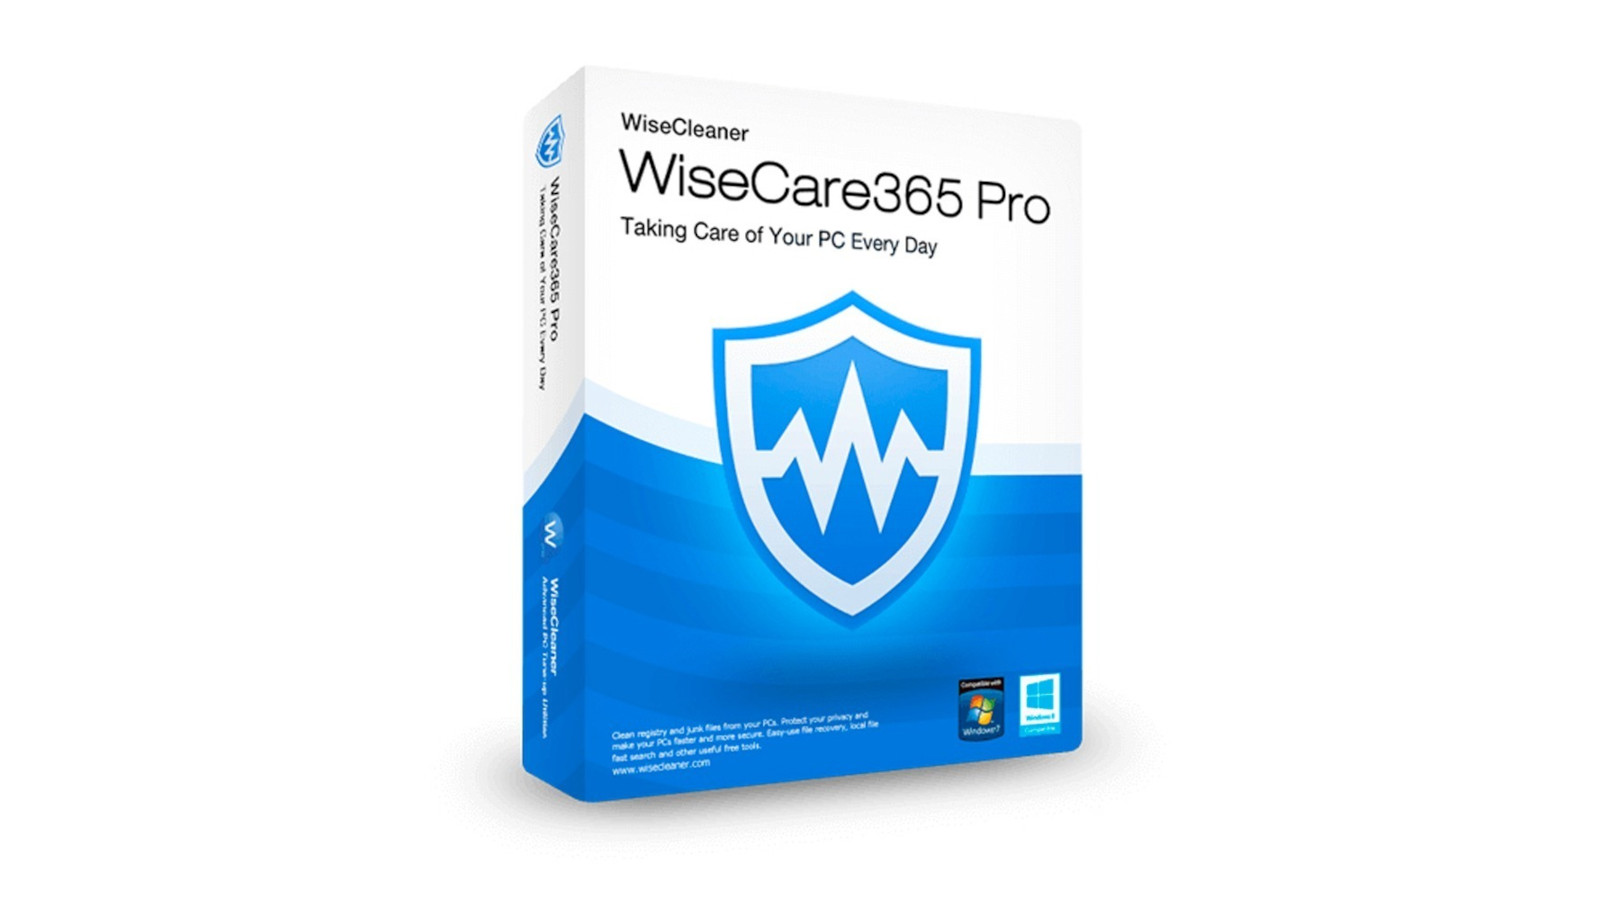 Wise Care 365 PRO CD Key (1 Year / 1 PC) [$ 18.05]